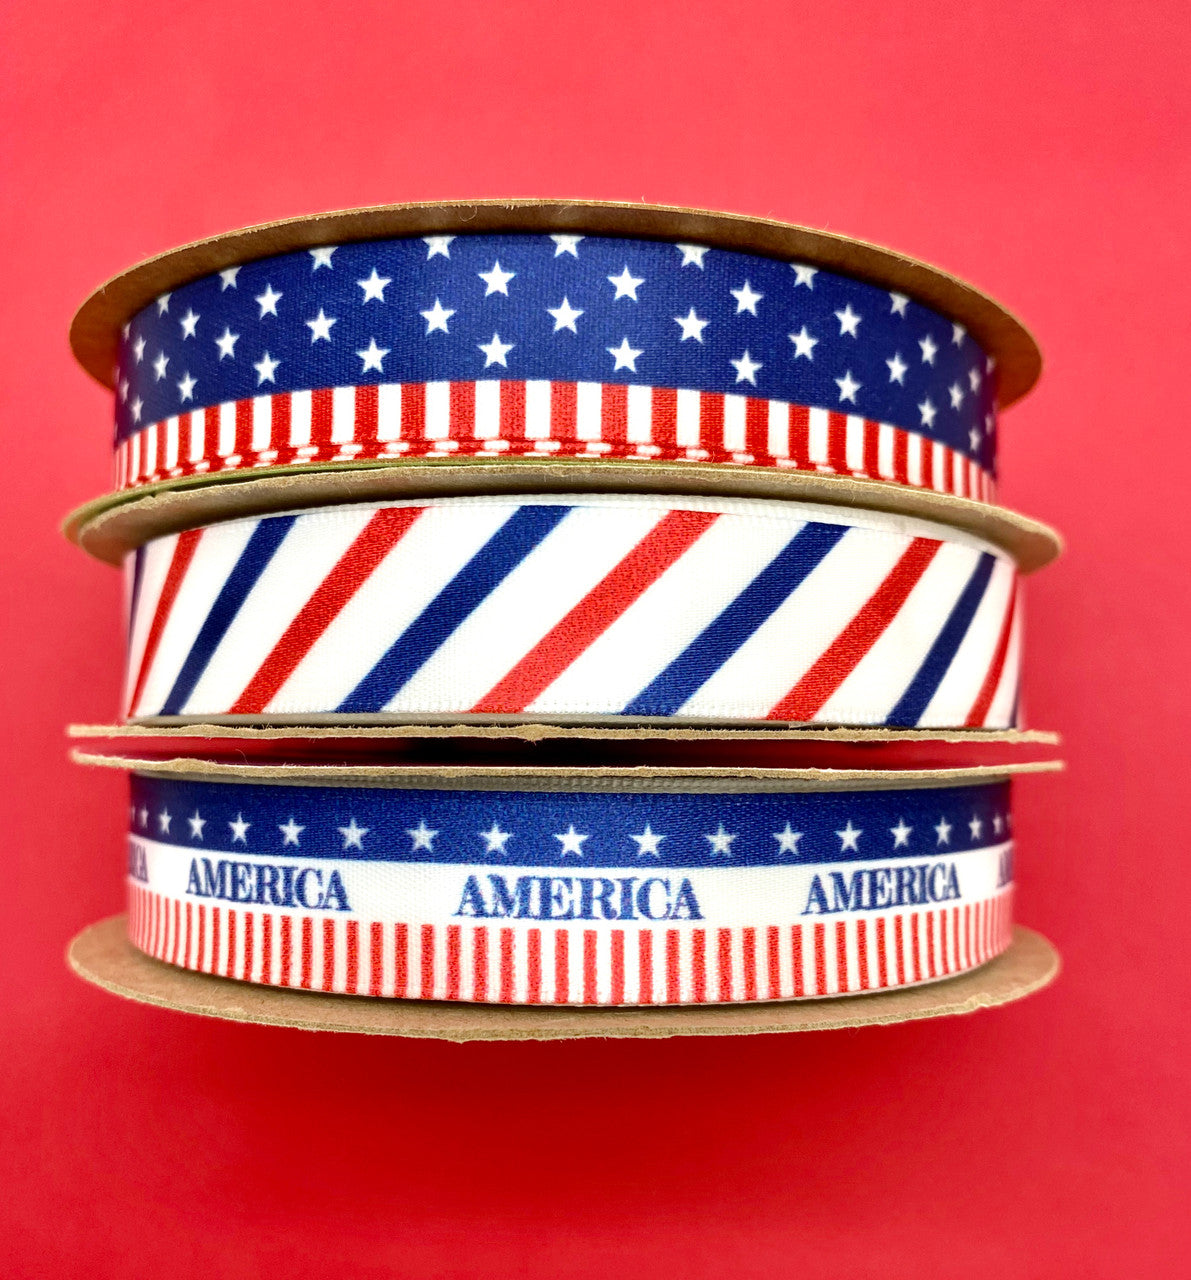 Mix and Match our red white and blue ribbons for a spectacular 4th of July celebration!